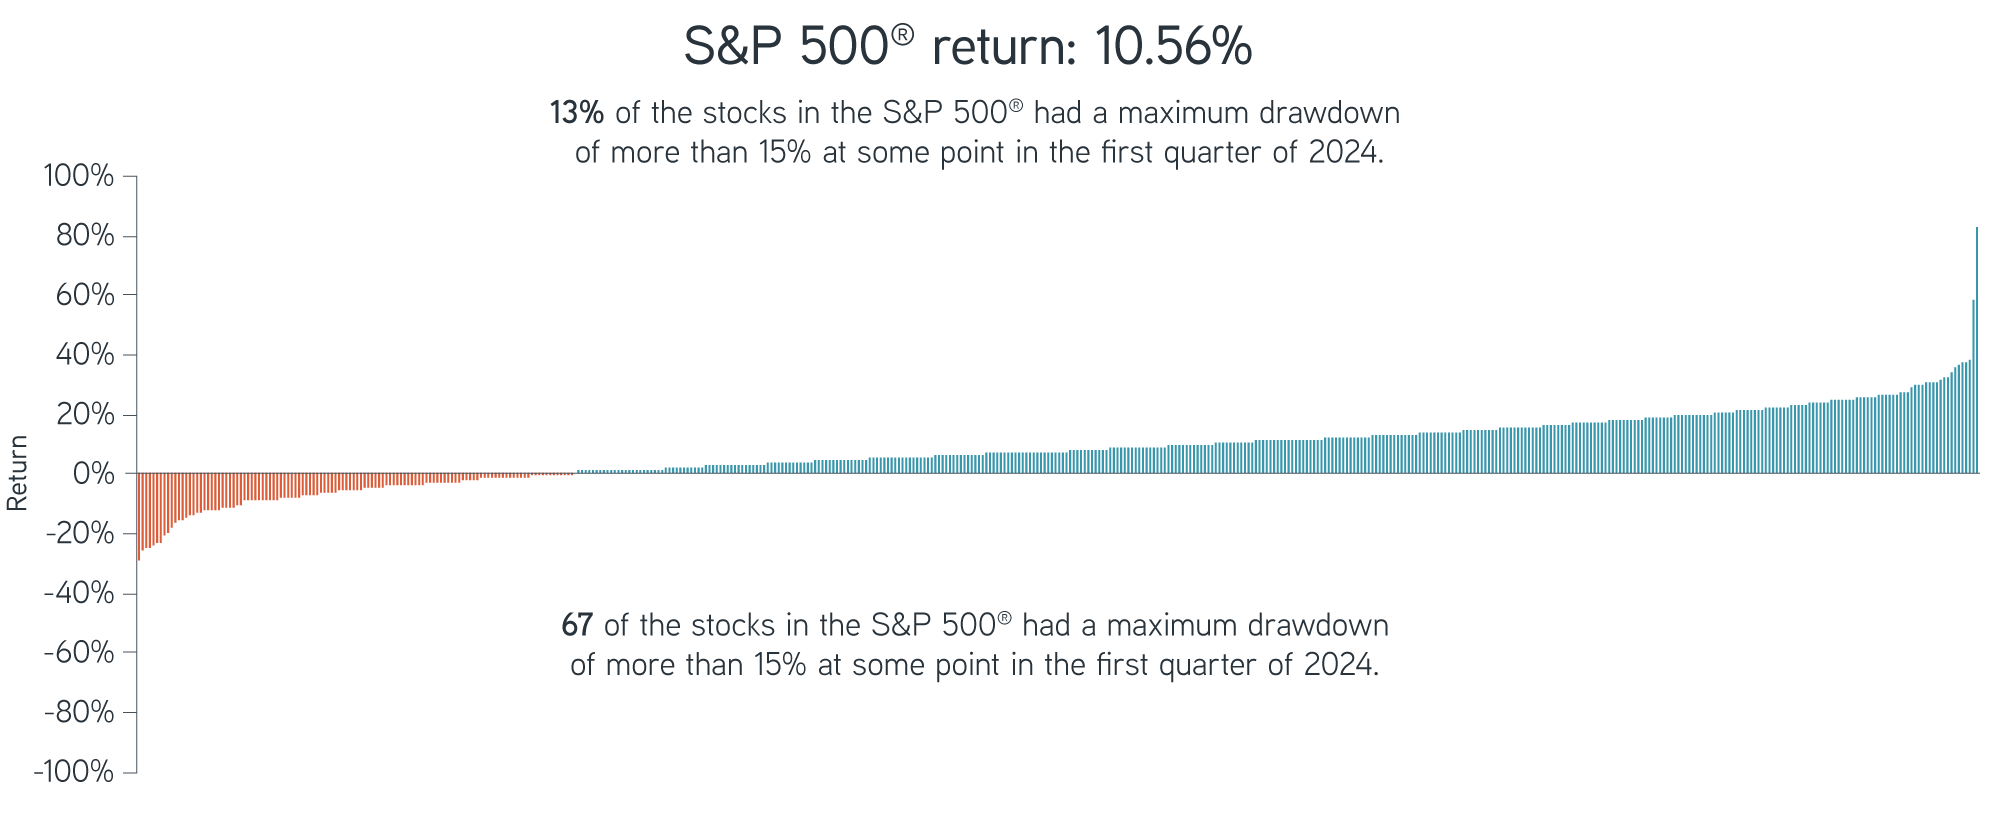 13% of the stocks in the S&P 500® had a maximum drawdown of more than 15% at some point in the first quarter of 2024.  67 of the stocks in the S&P 500® had a maximum drawdown of more than 15% at some point in the first quarter of 2024.